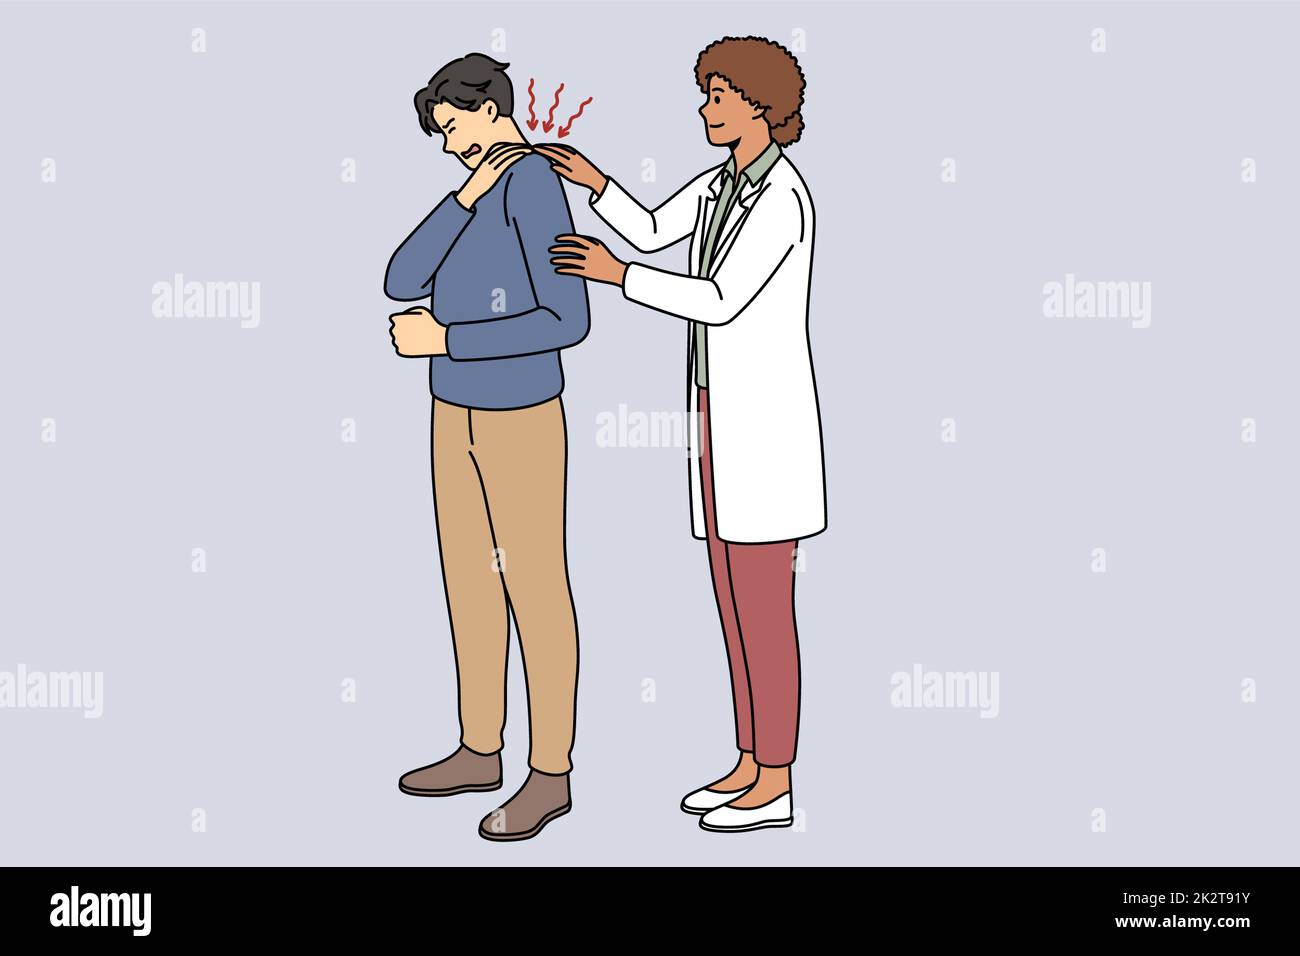 Doctor helping male patient with backache Stock Photo